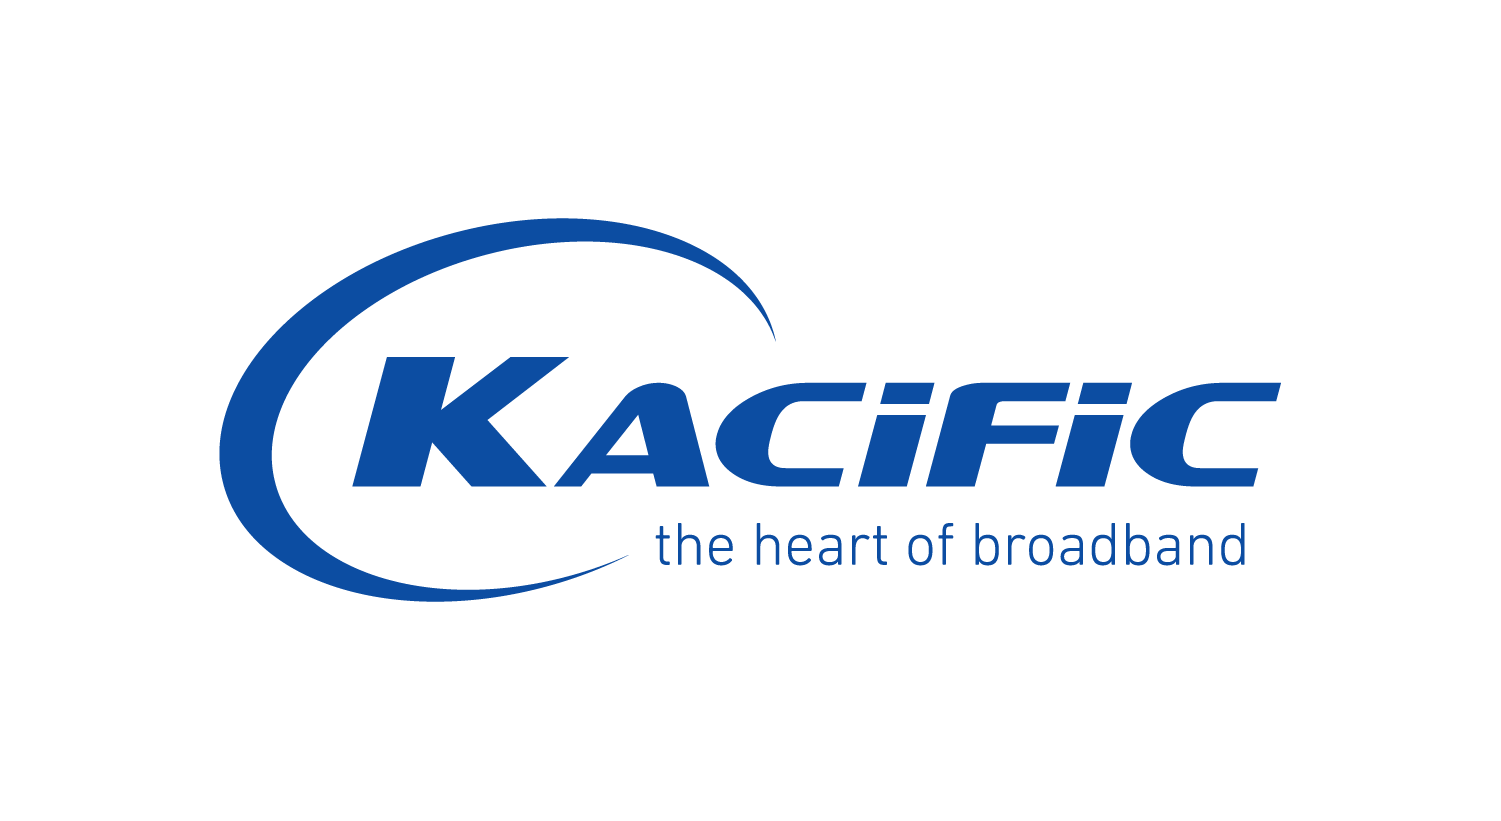 Next-Gen Satellite Operator Kacific Expands Internet Access, Emergency Communication Capabilities Across Asia-Pacific